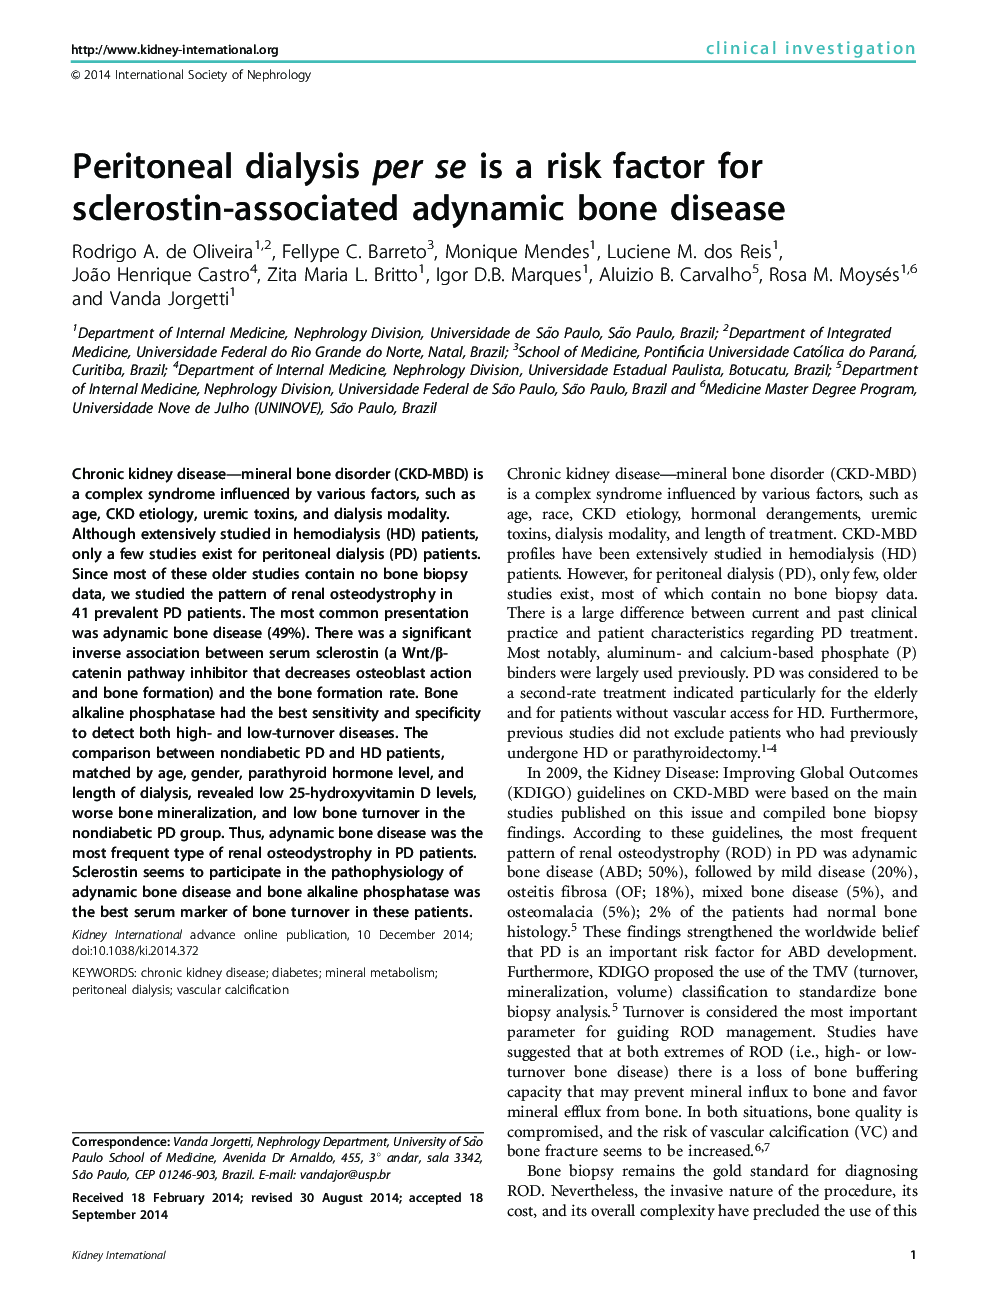 Peritoneal dialysis per se is a risk factor for sclerostin-associated adynamic bone disease